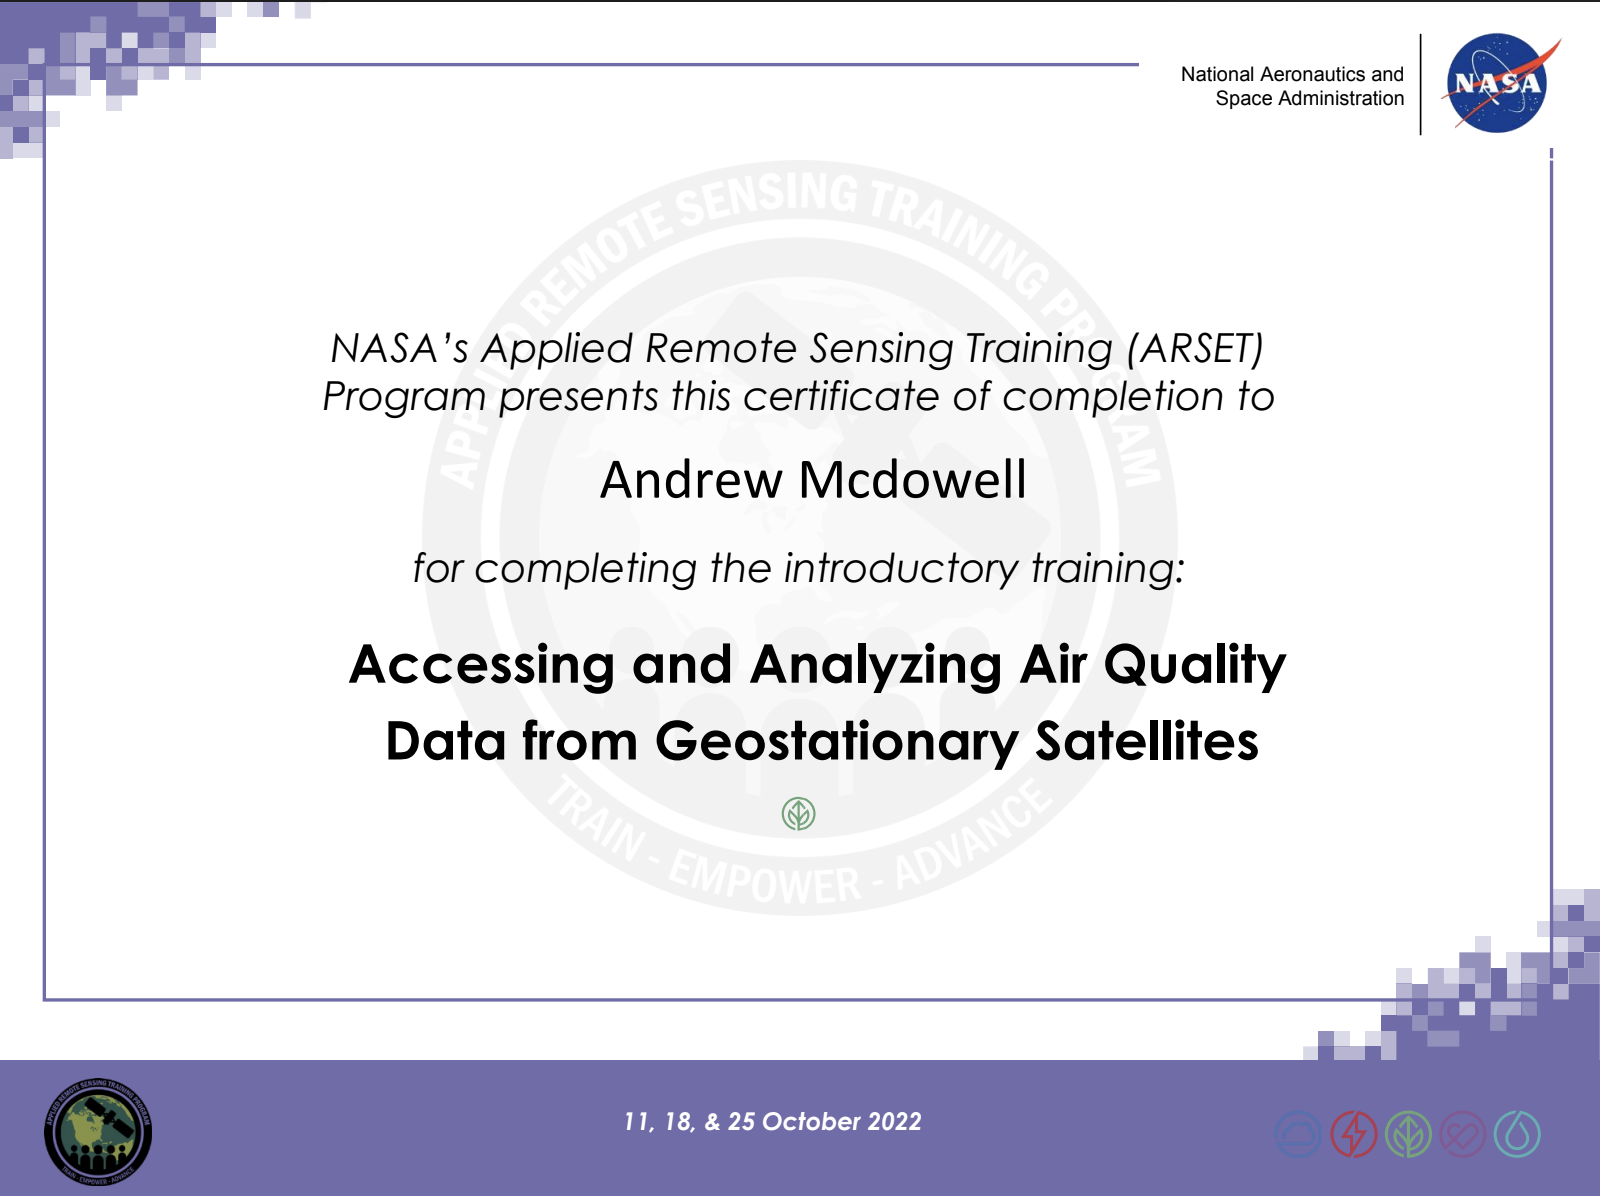 ARSET Accessing and Analyzing Air Quality Data from Geostationary Satellites certificate